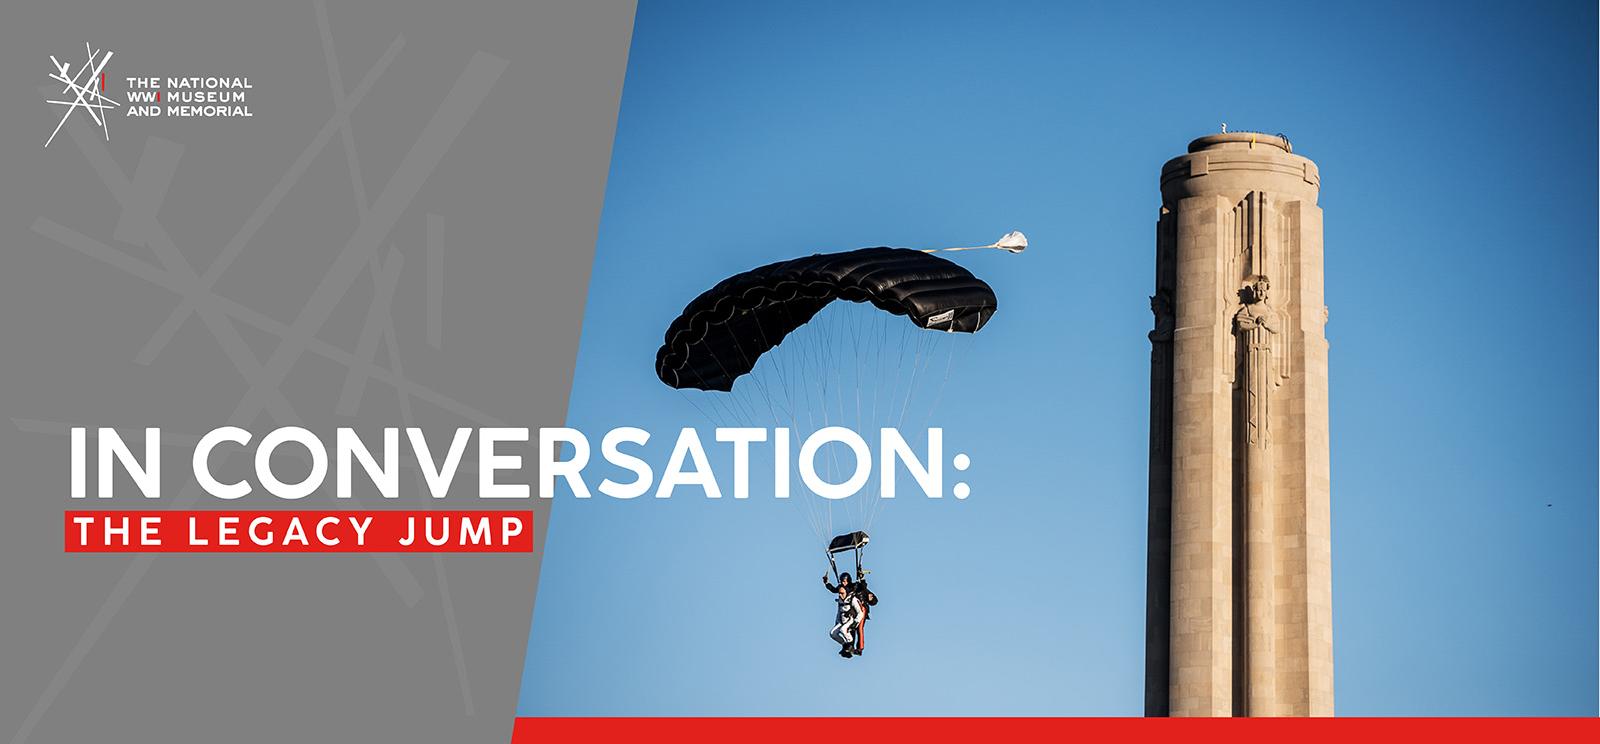 Image: Modern photo of the top half of the Liberty Memorial Tower against a stunning blue sky. Two skydivers in tandem are parachuting down right next to it. Text: 'In Conversation: / The Legacy Jump'